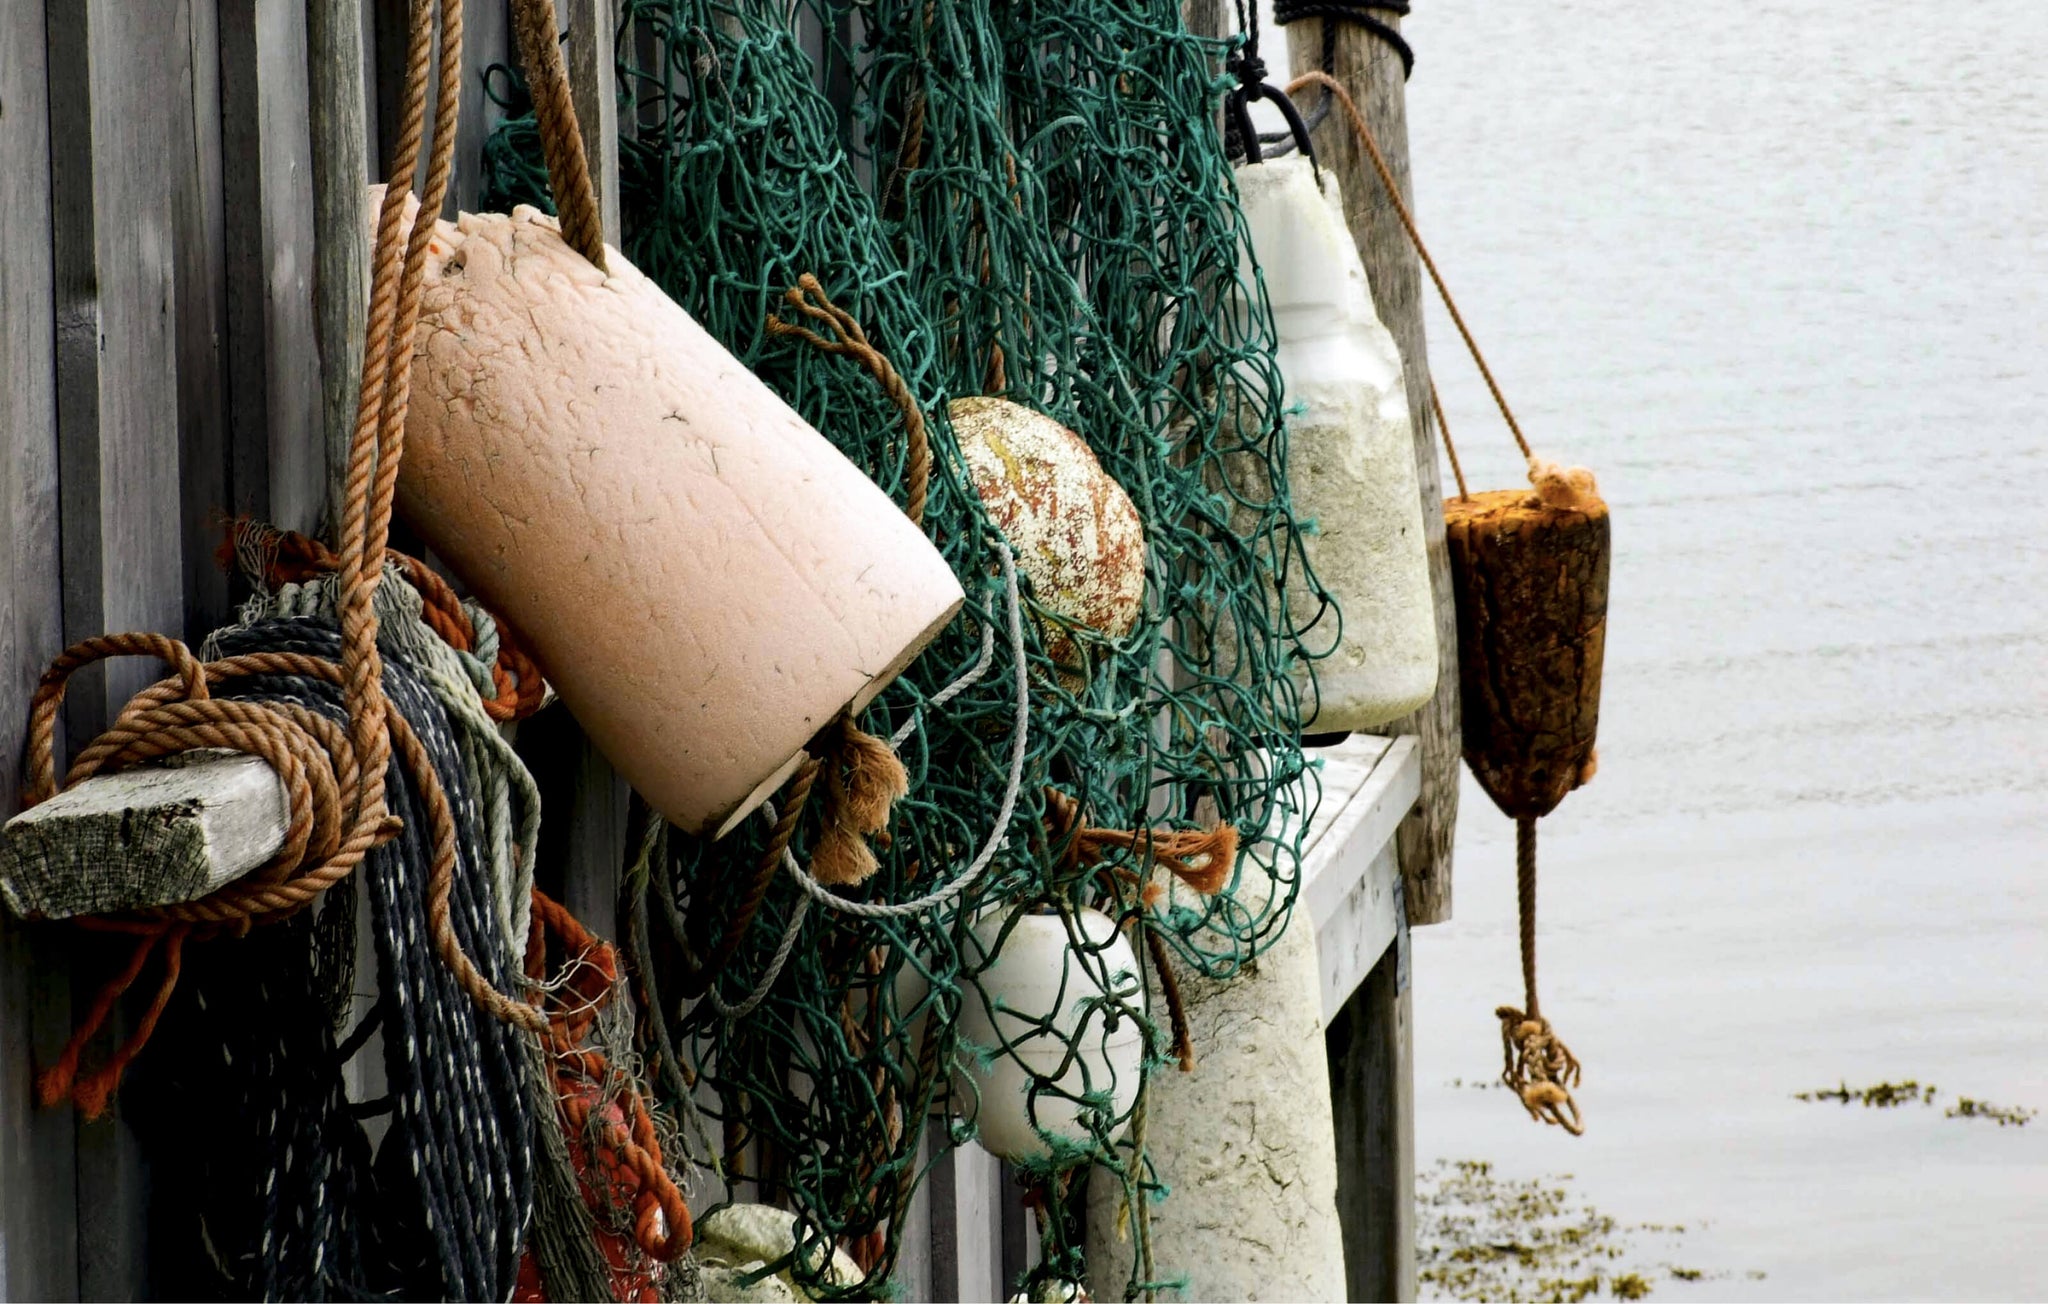 Fishing nets and buoys hanging on a wooden fence